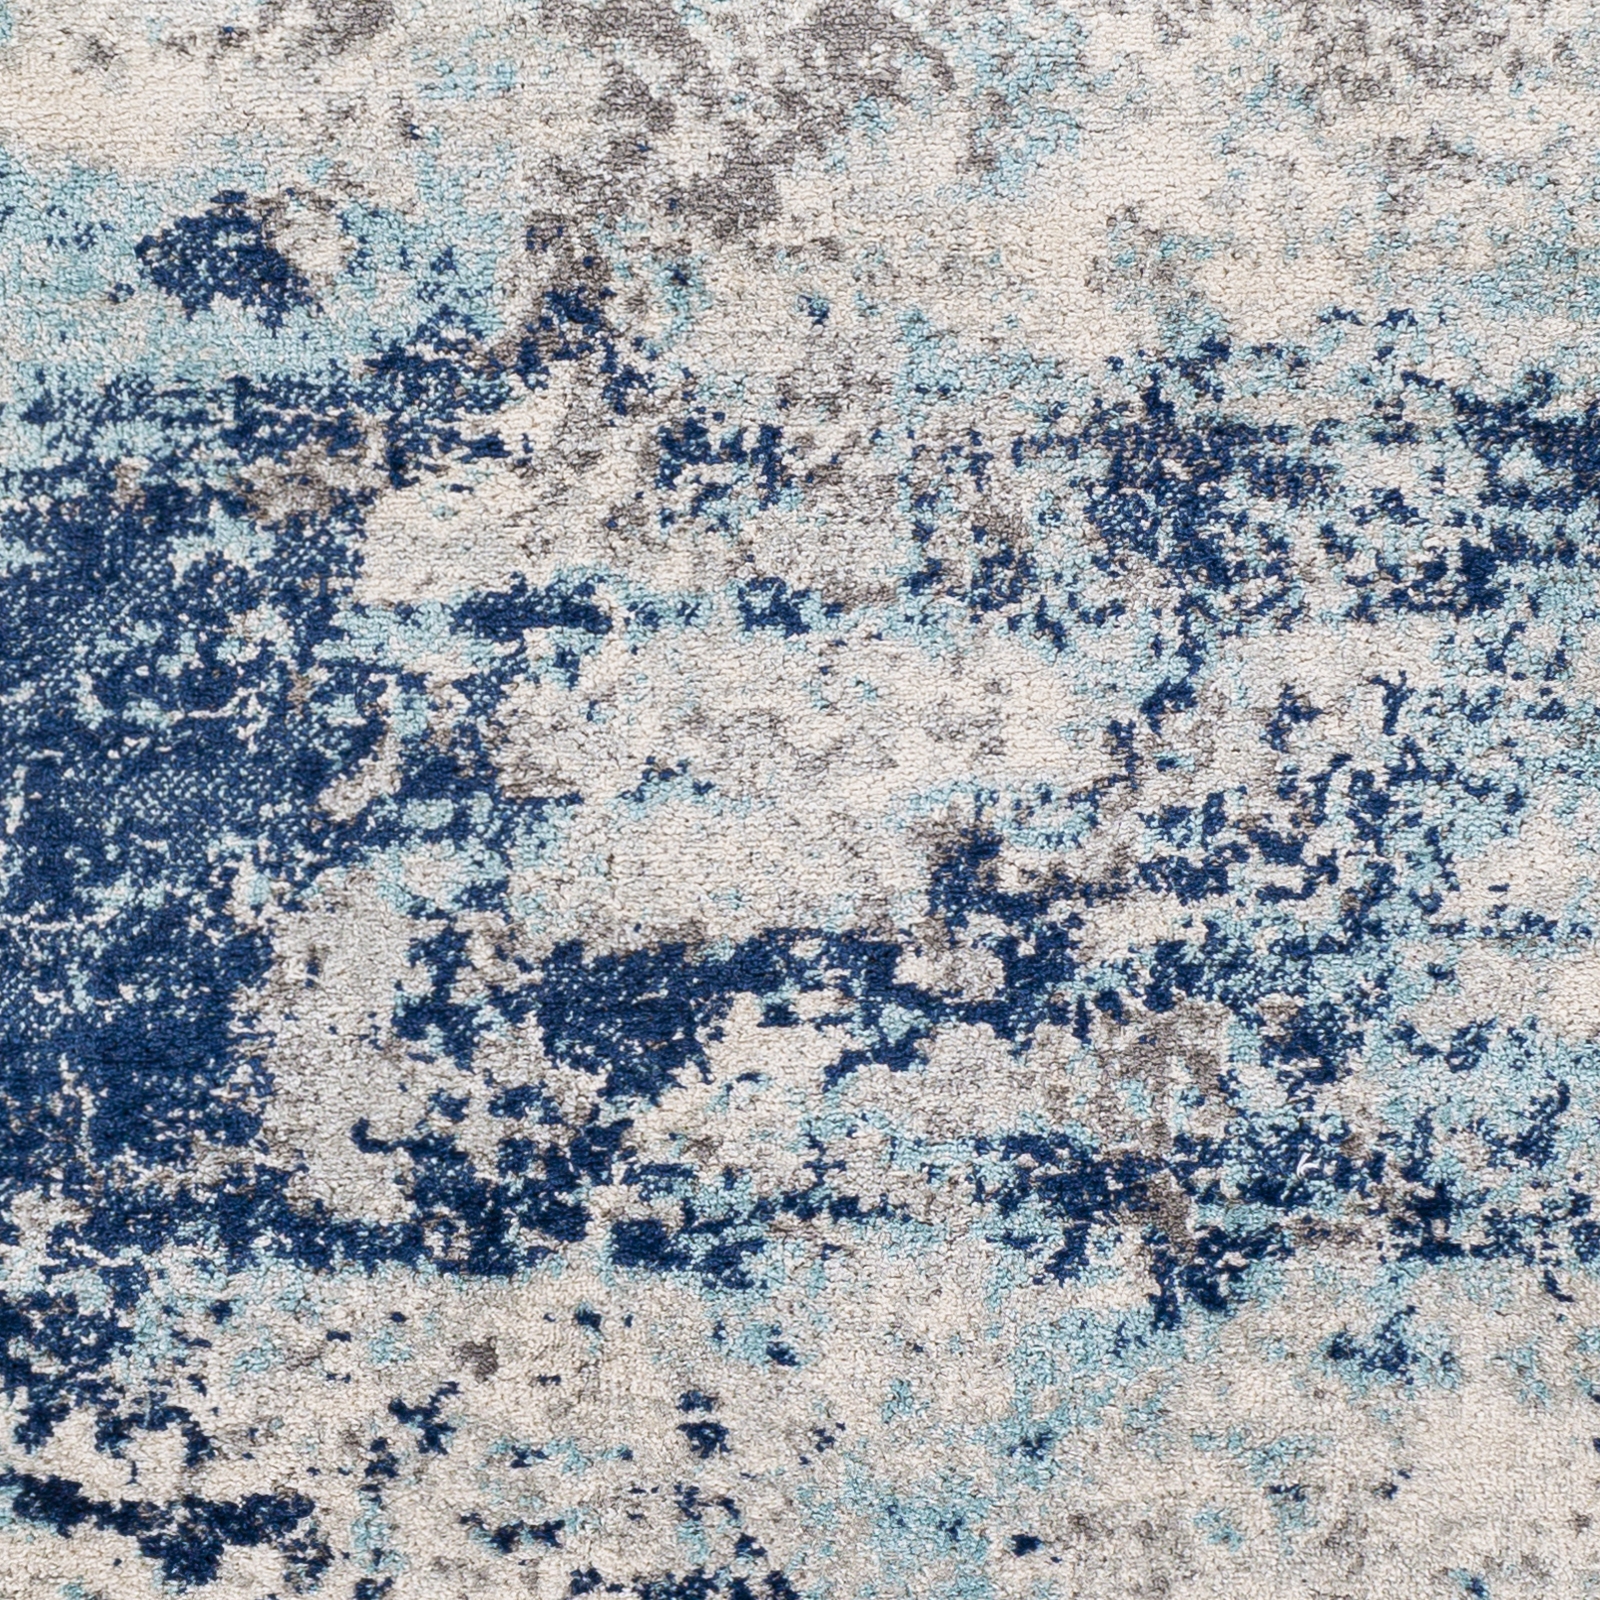 Chester Rug, 7'10" x 10'2" - Image 5